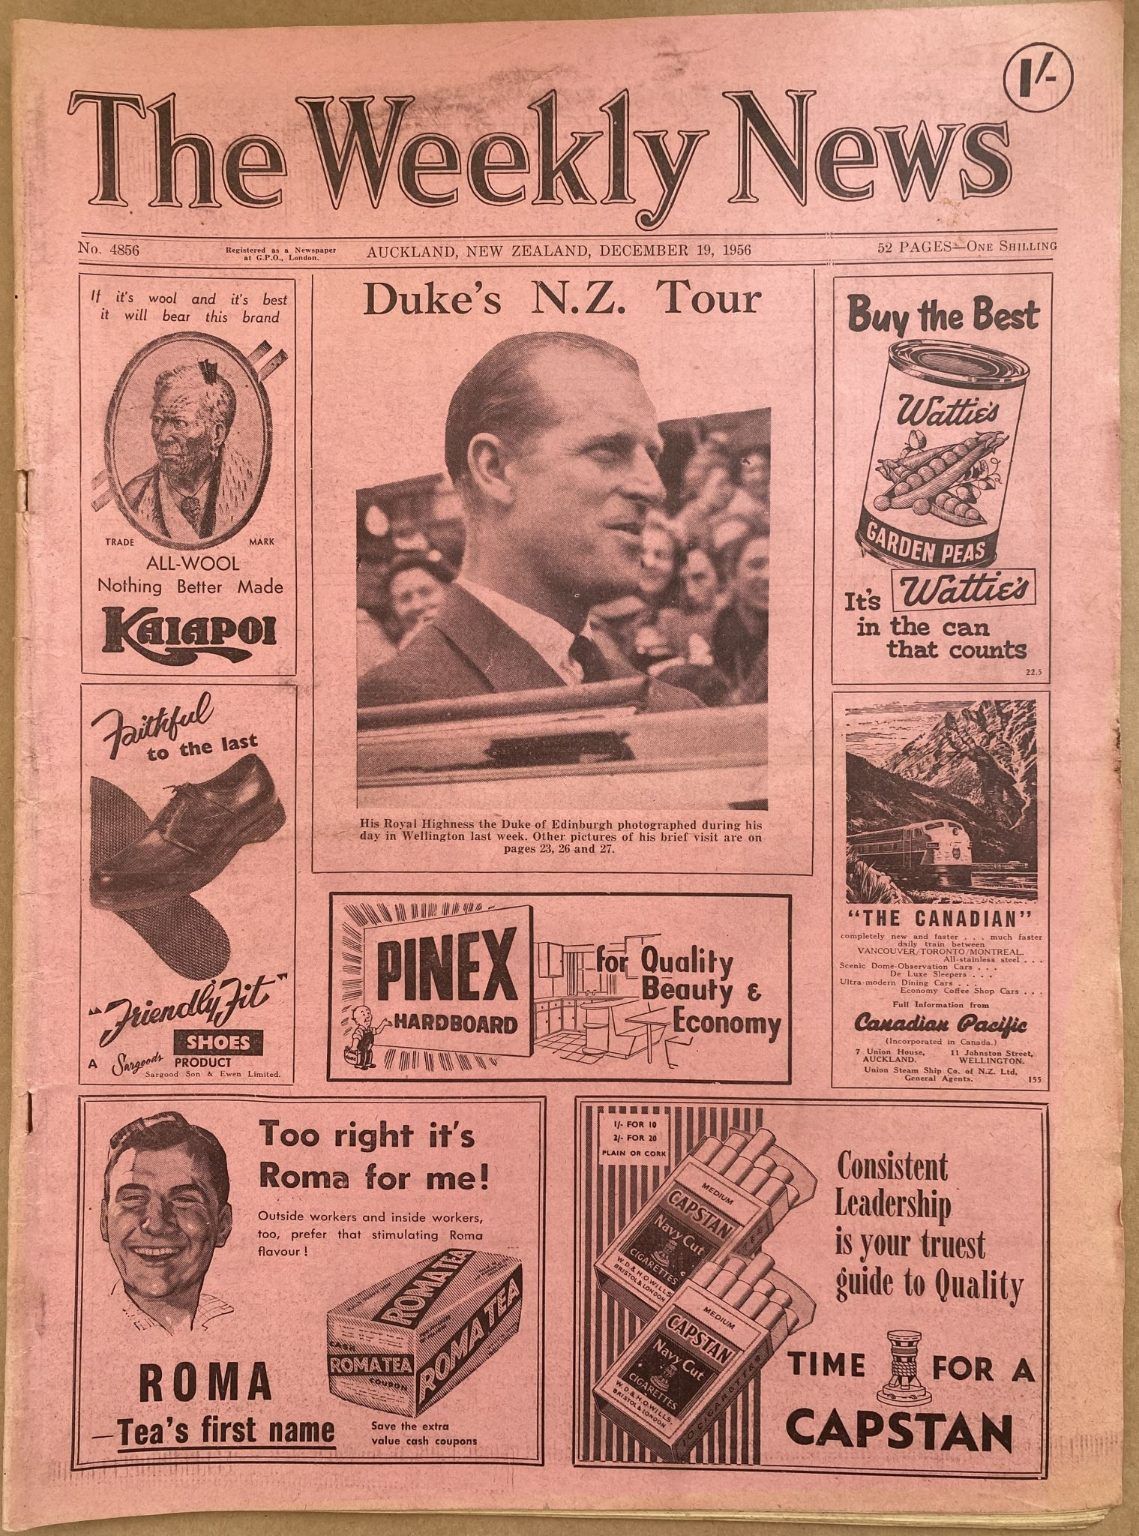 OLD NEWSPAPER: The Weekly News - No. 4856, 19 December 1956